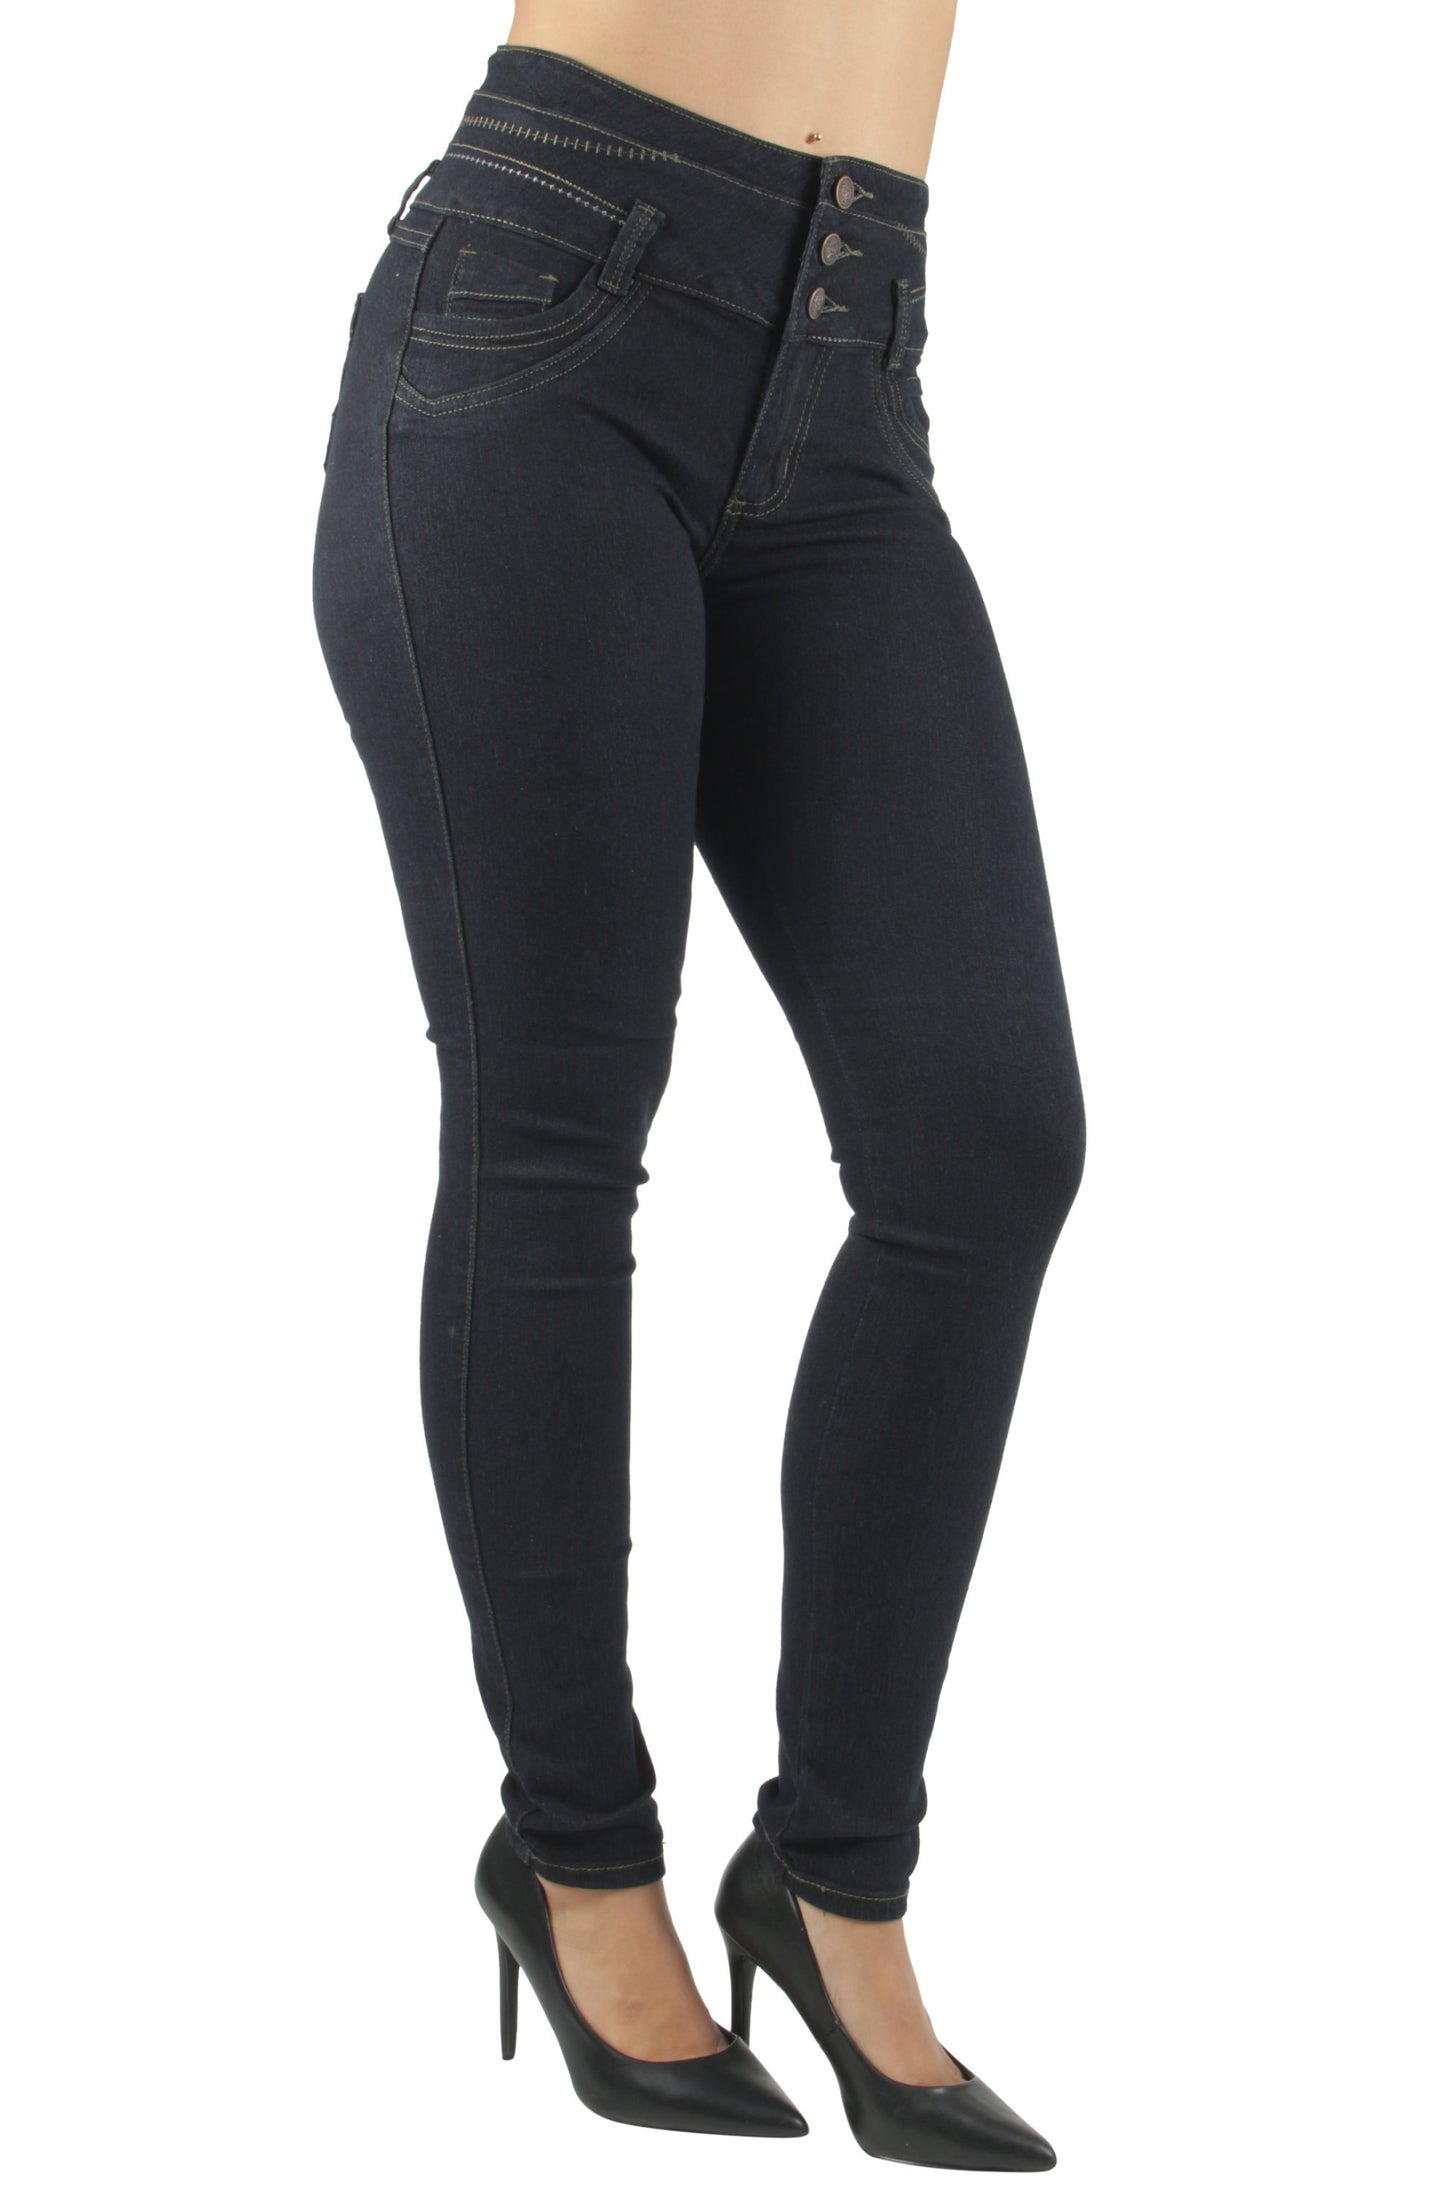 High Rise Women's Jeans Black Slimming Skinny Colombia Butt Lifter Levanta  Cola